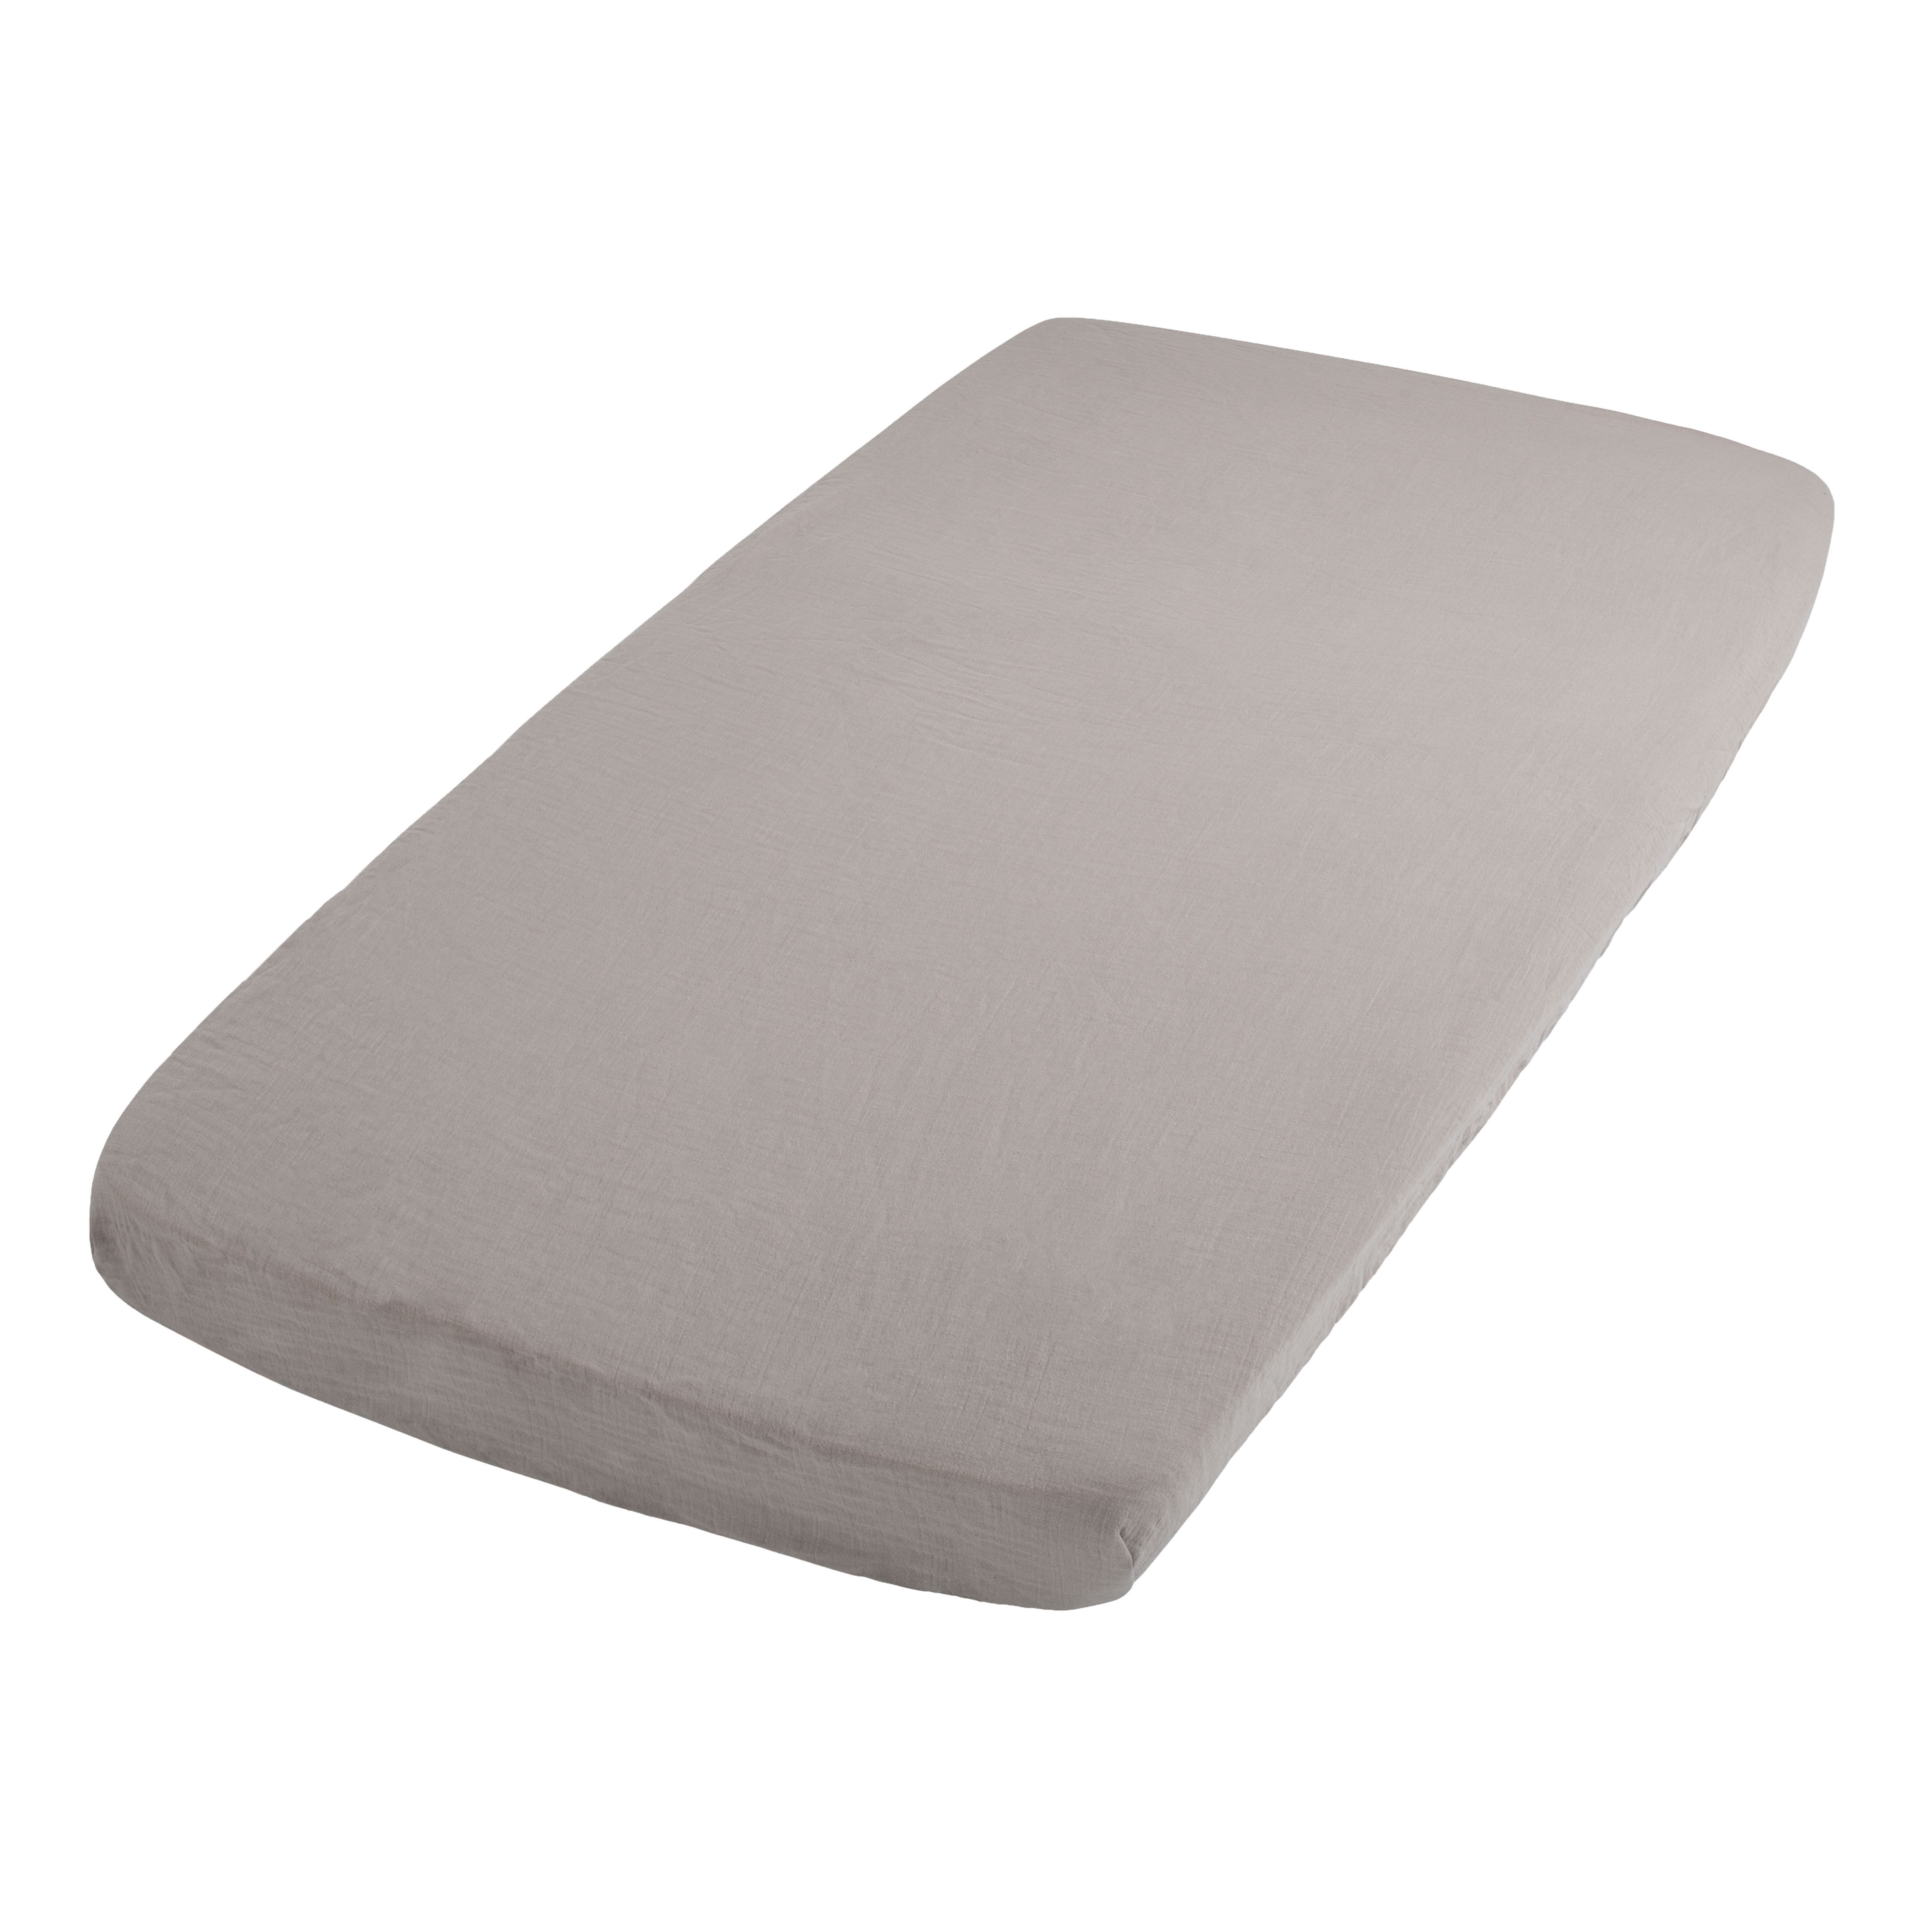 Fitted sheet Breeze urban taupe - 60x120